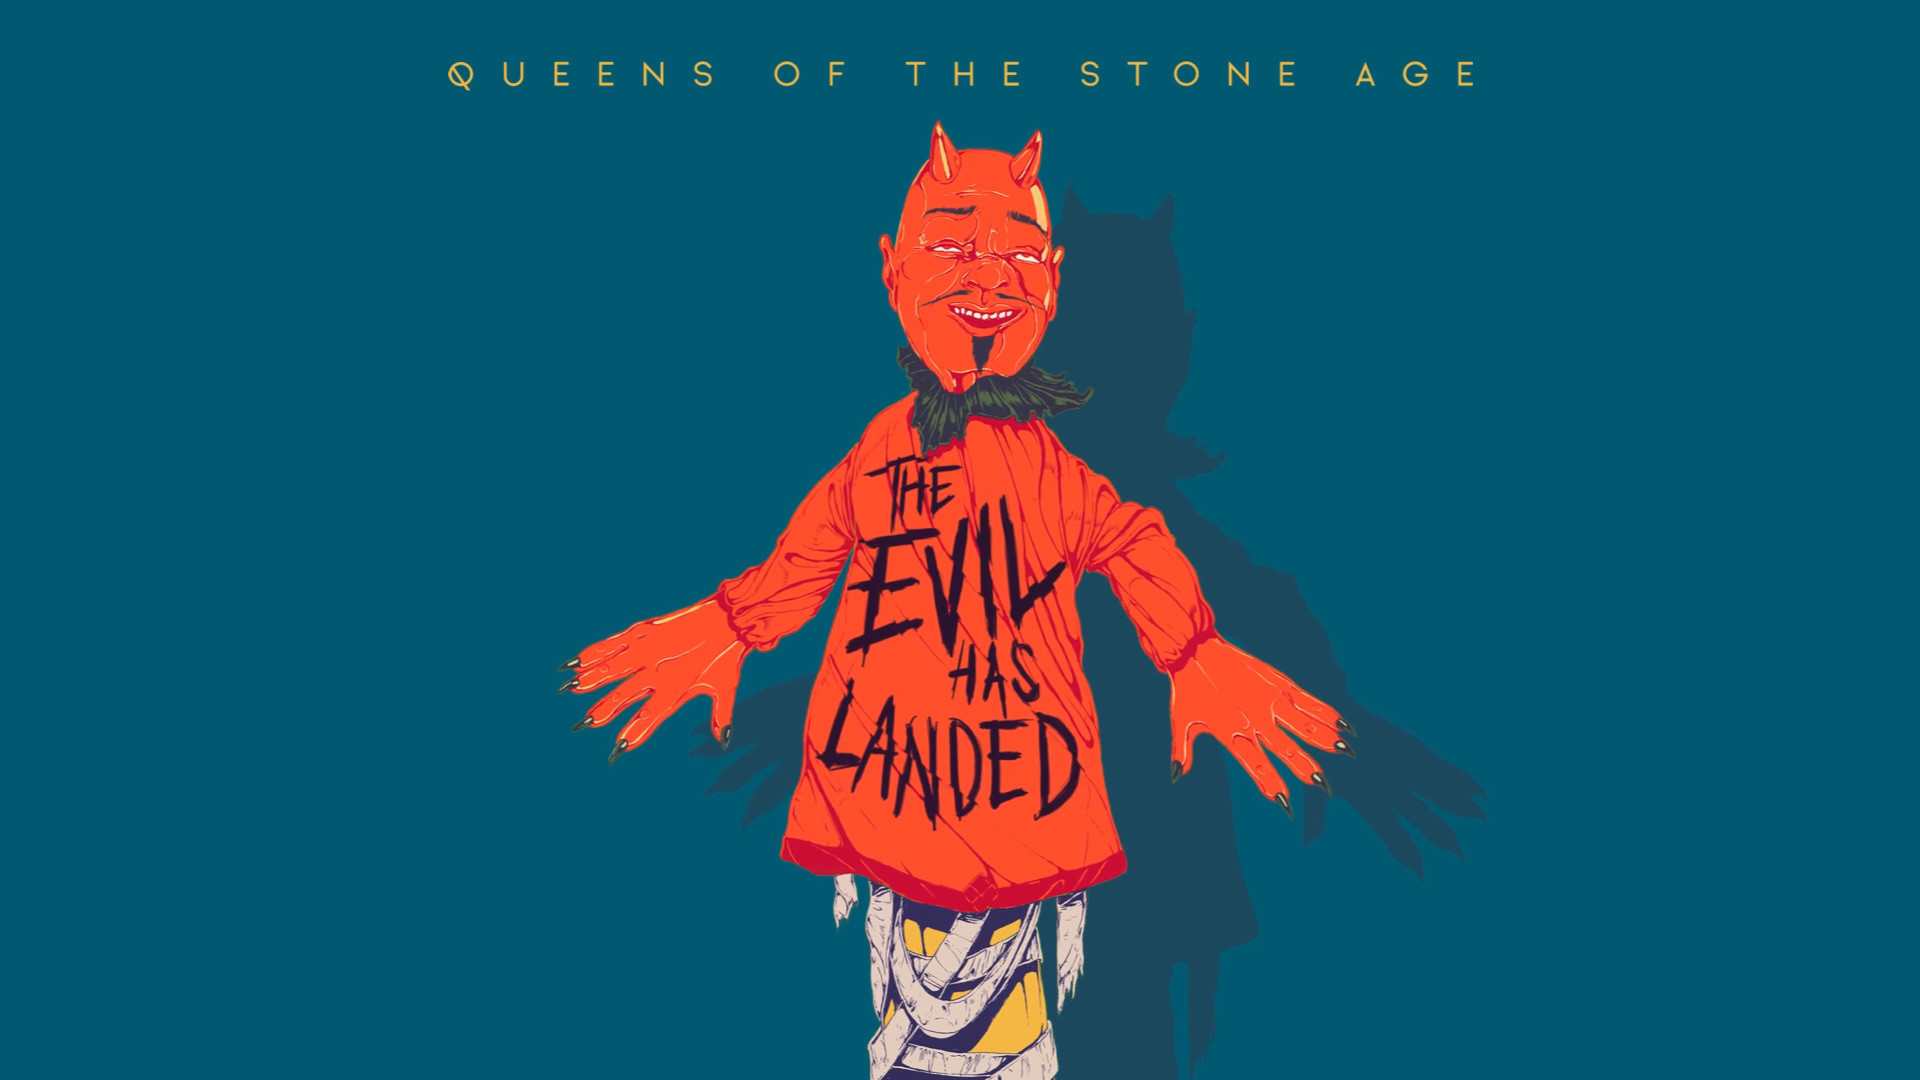 1920x1080 General  Queens of the Stone Age villains